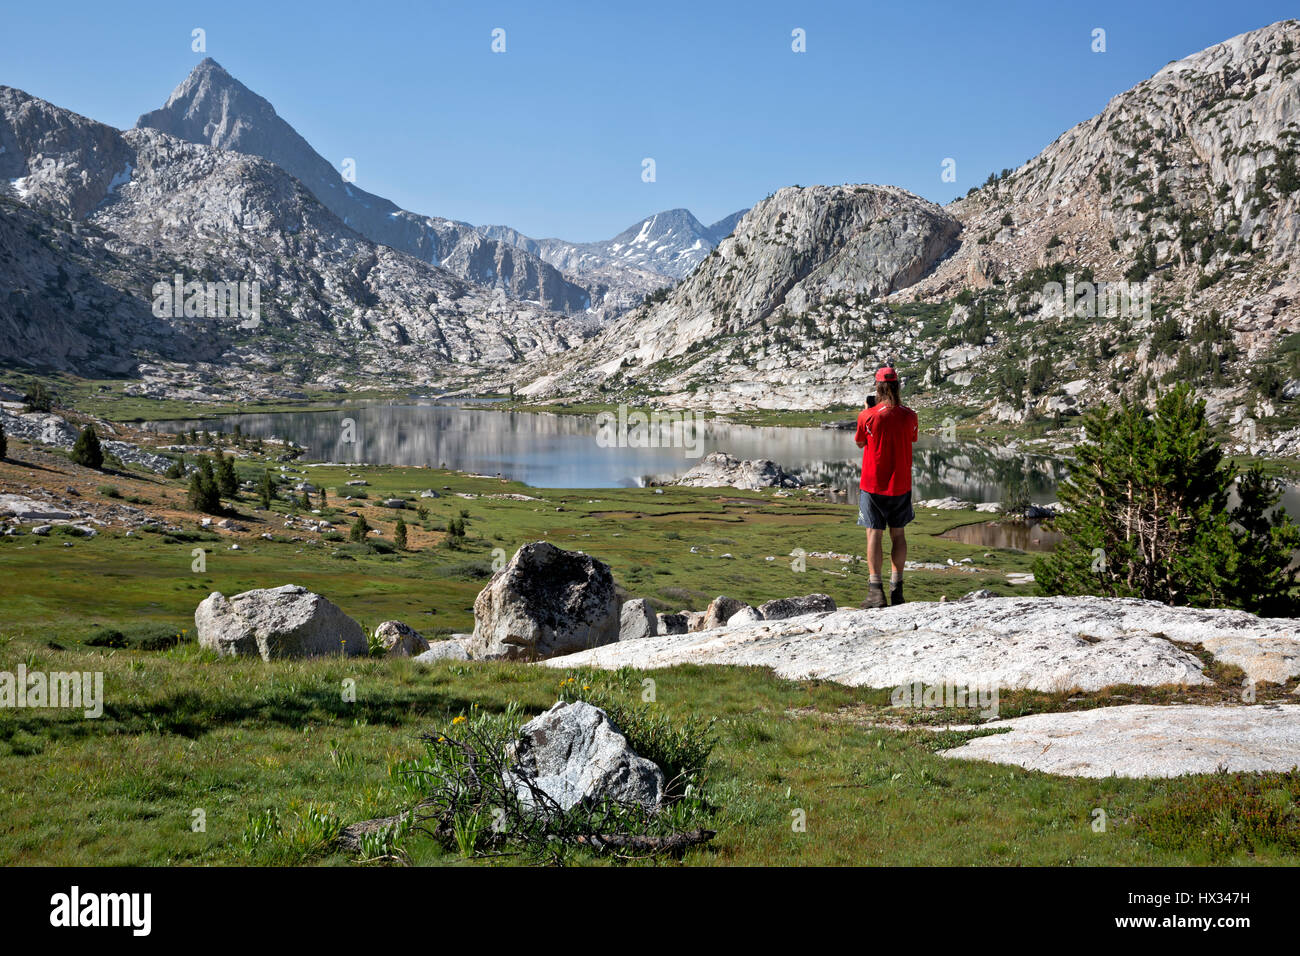 CA03117-00...CALIFORNIA - Hiker photographing Evolution Lake located along the JMT/PCT in Kings Canyon National Park. Stock Photo